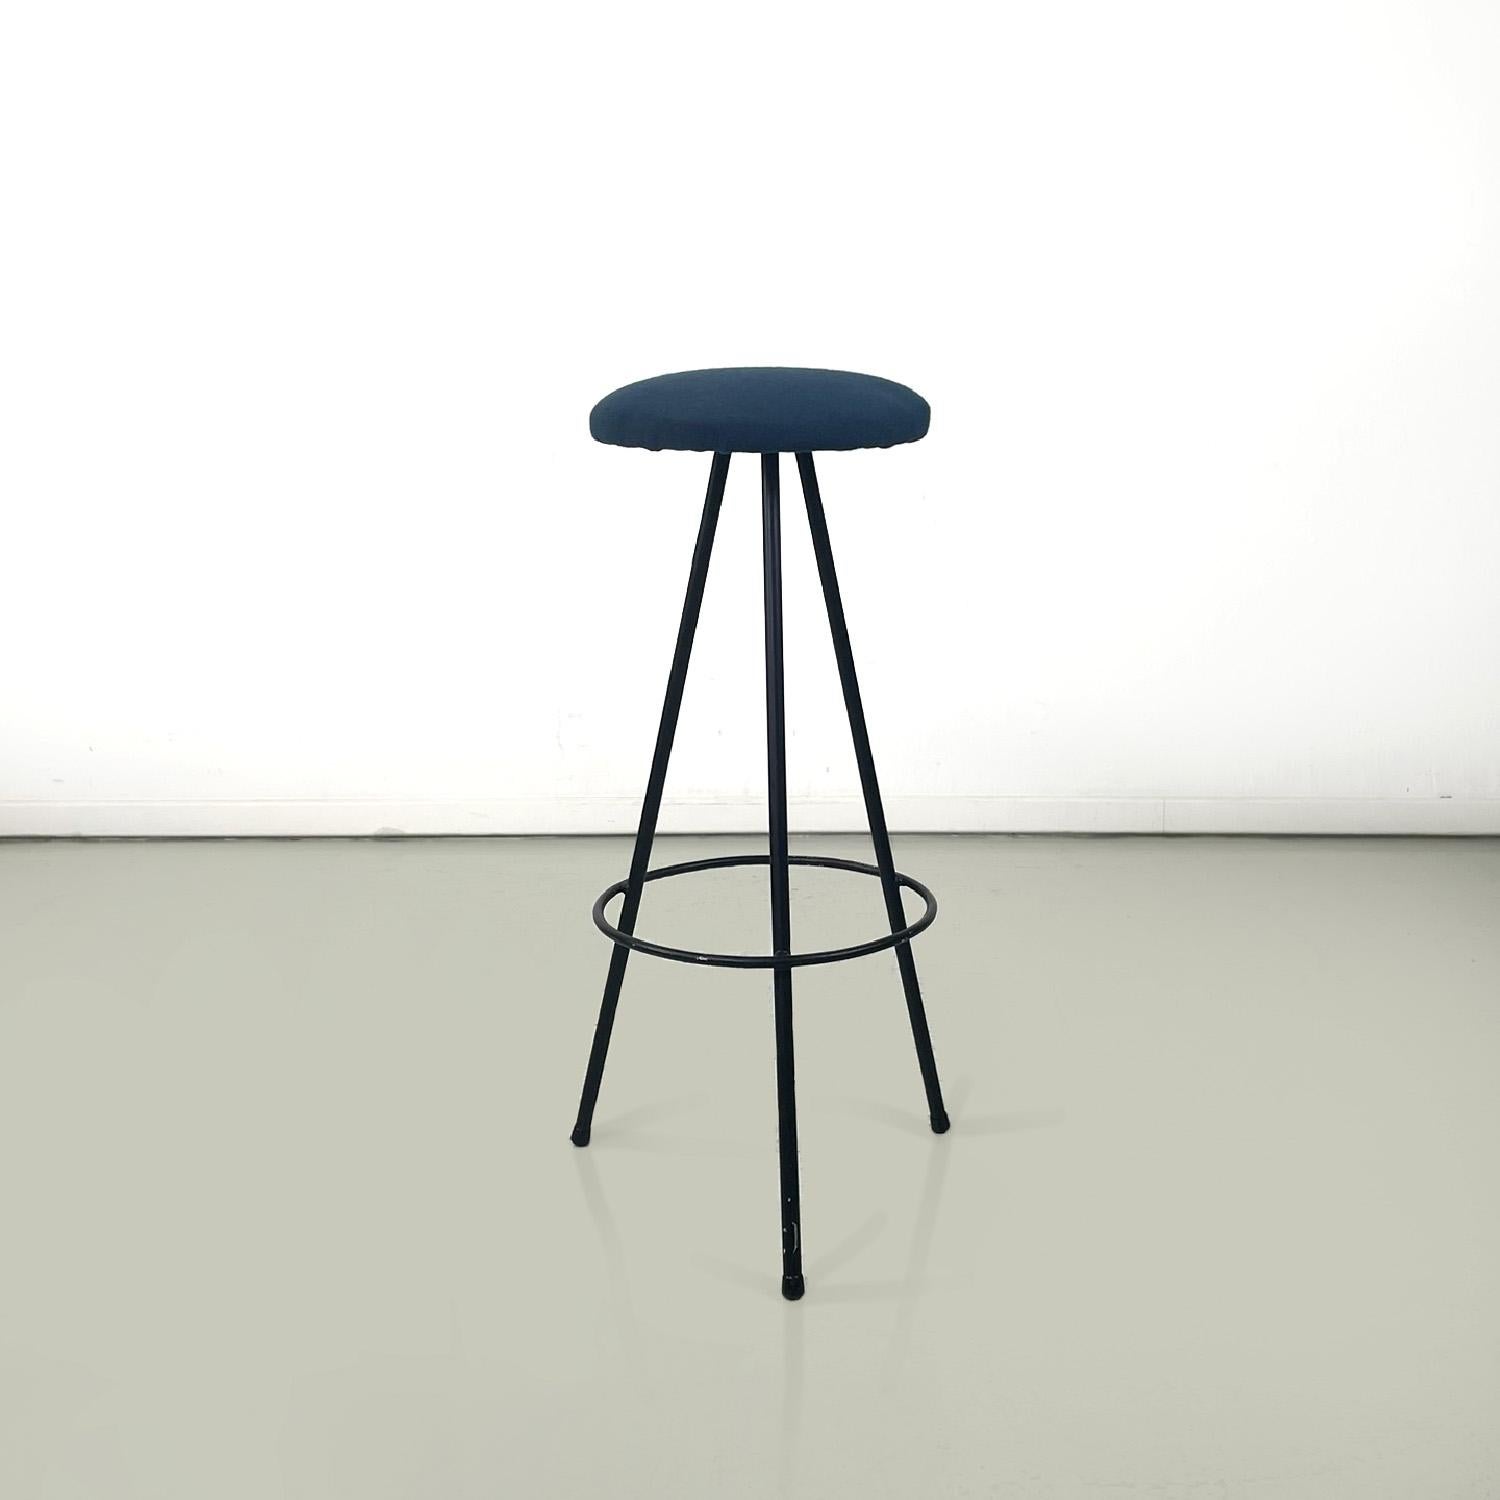 Italian mid-century modern three legs black metal and blue fabric stool, 1950s
High bar stool with round base. The seat is round and is in blue fabric. The legs are made of black painted metal rod with a rounded foot and are joined by a